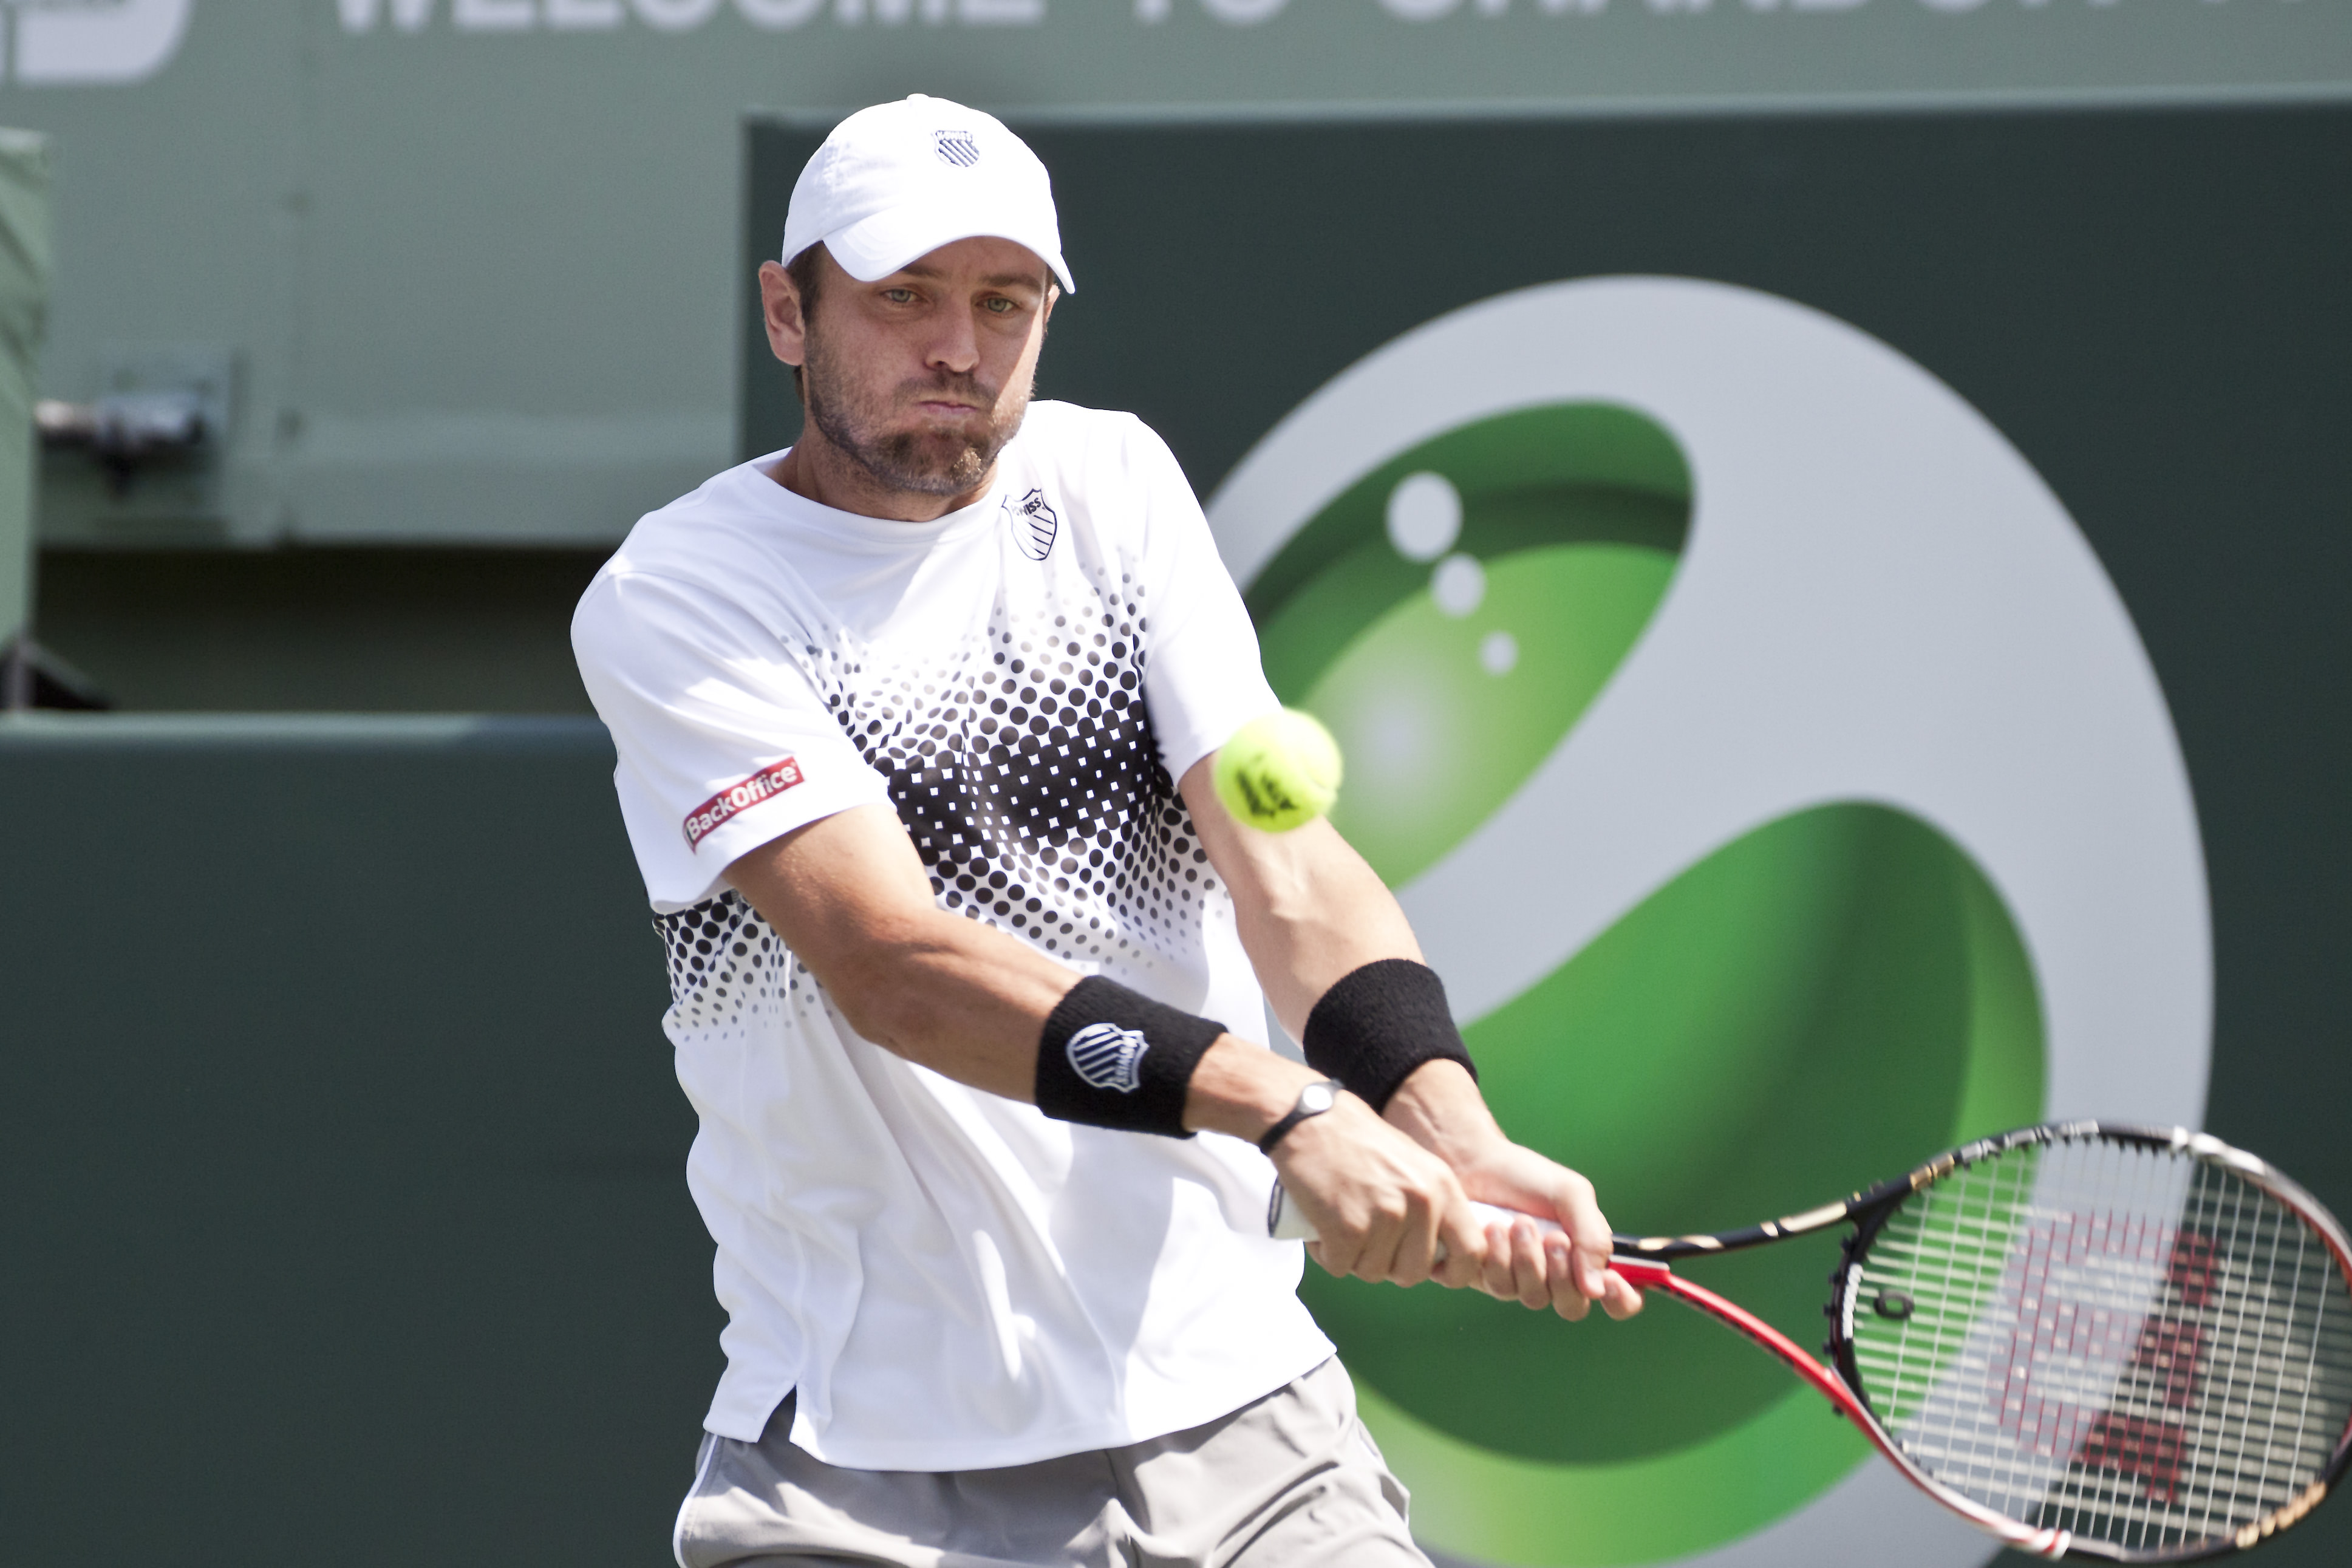 Fish to Headline ATP Delray Champions Event; Pre-Qualie Tennis Results ...